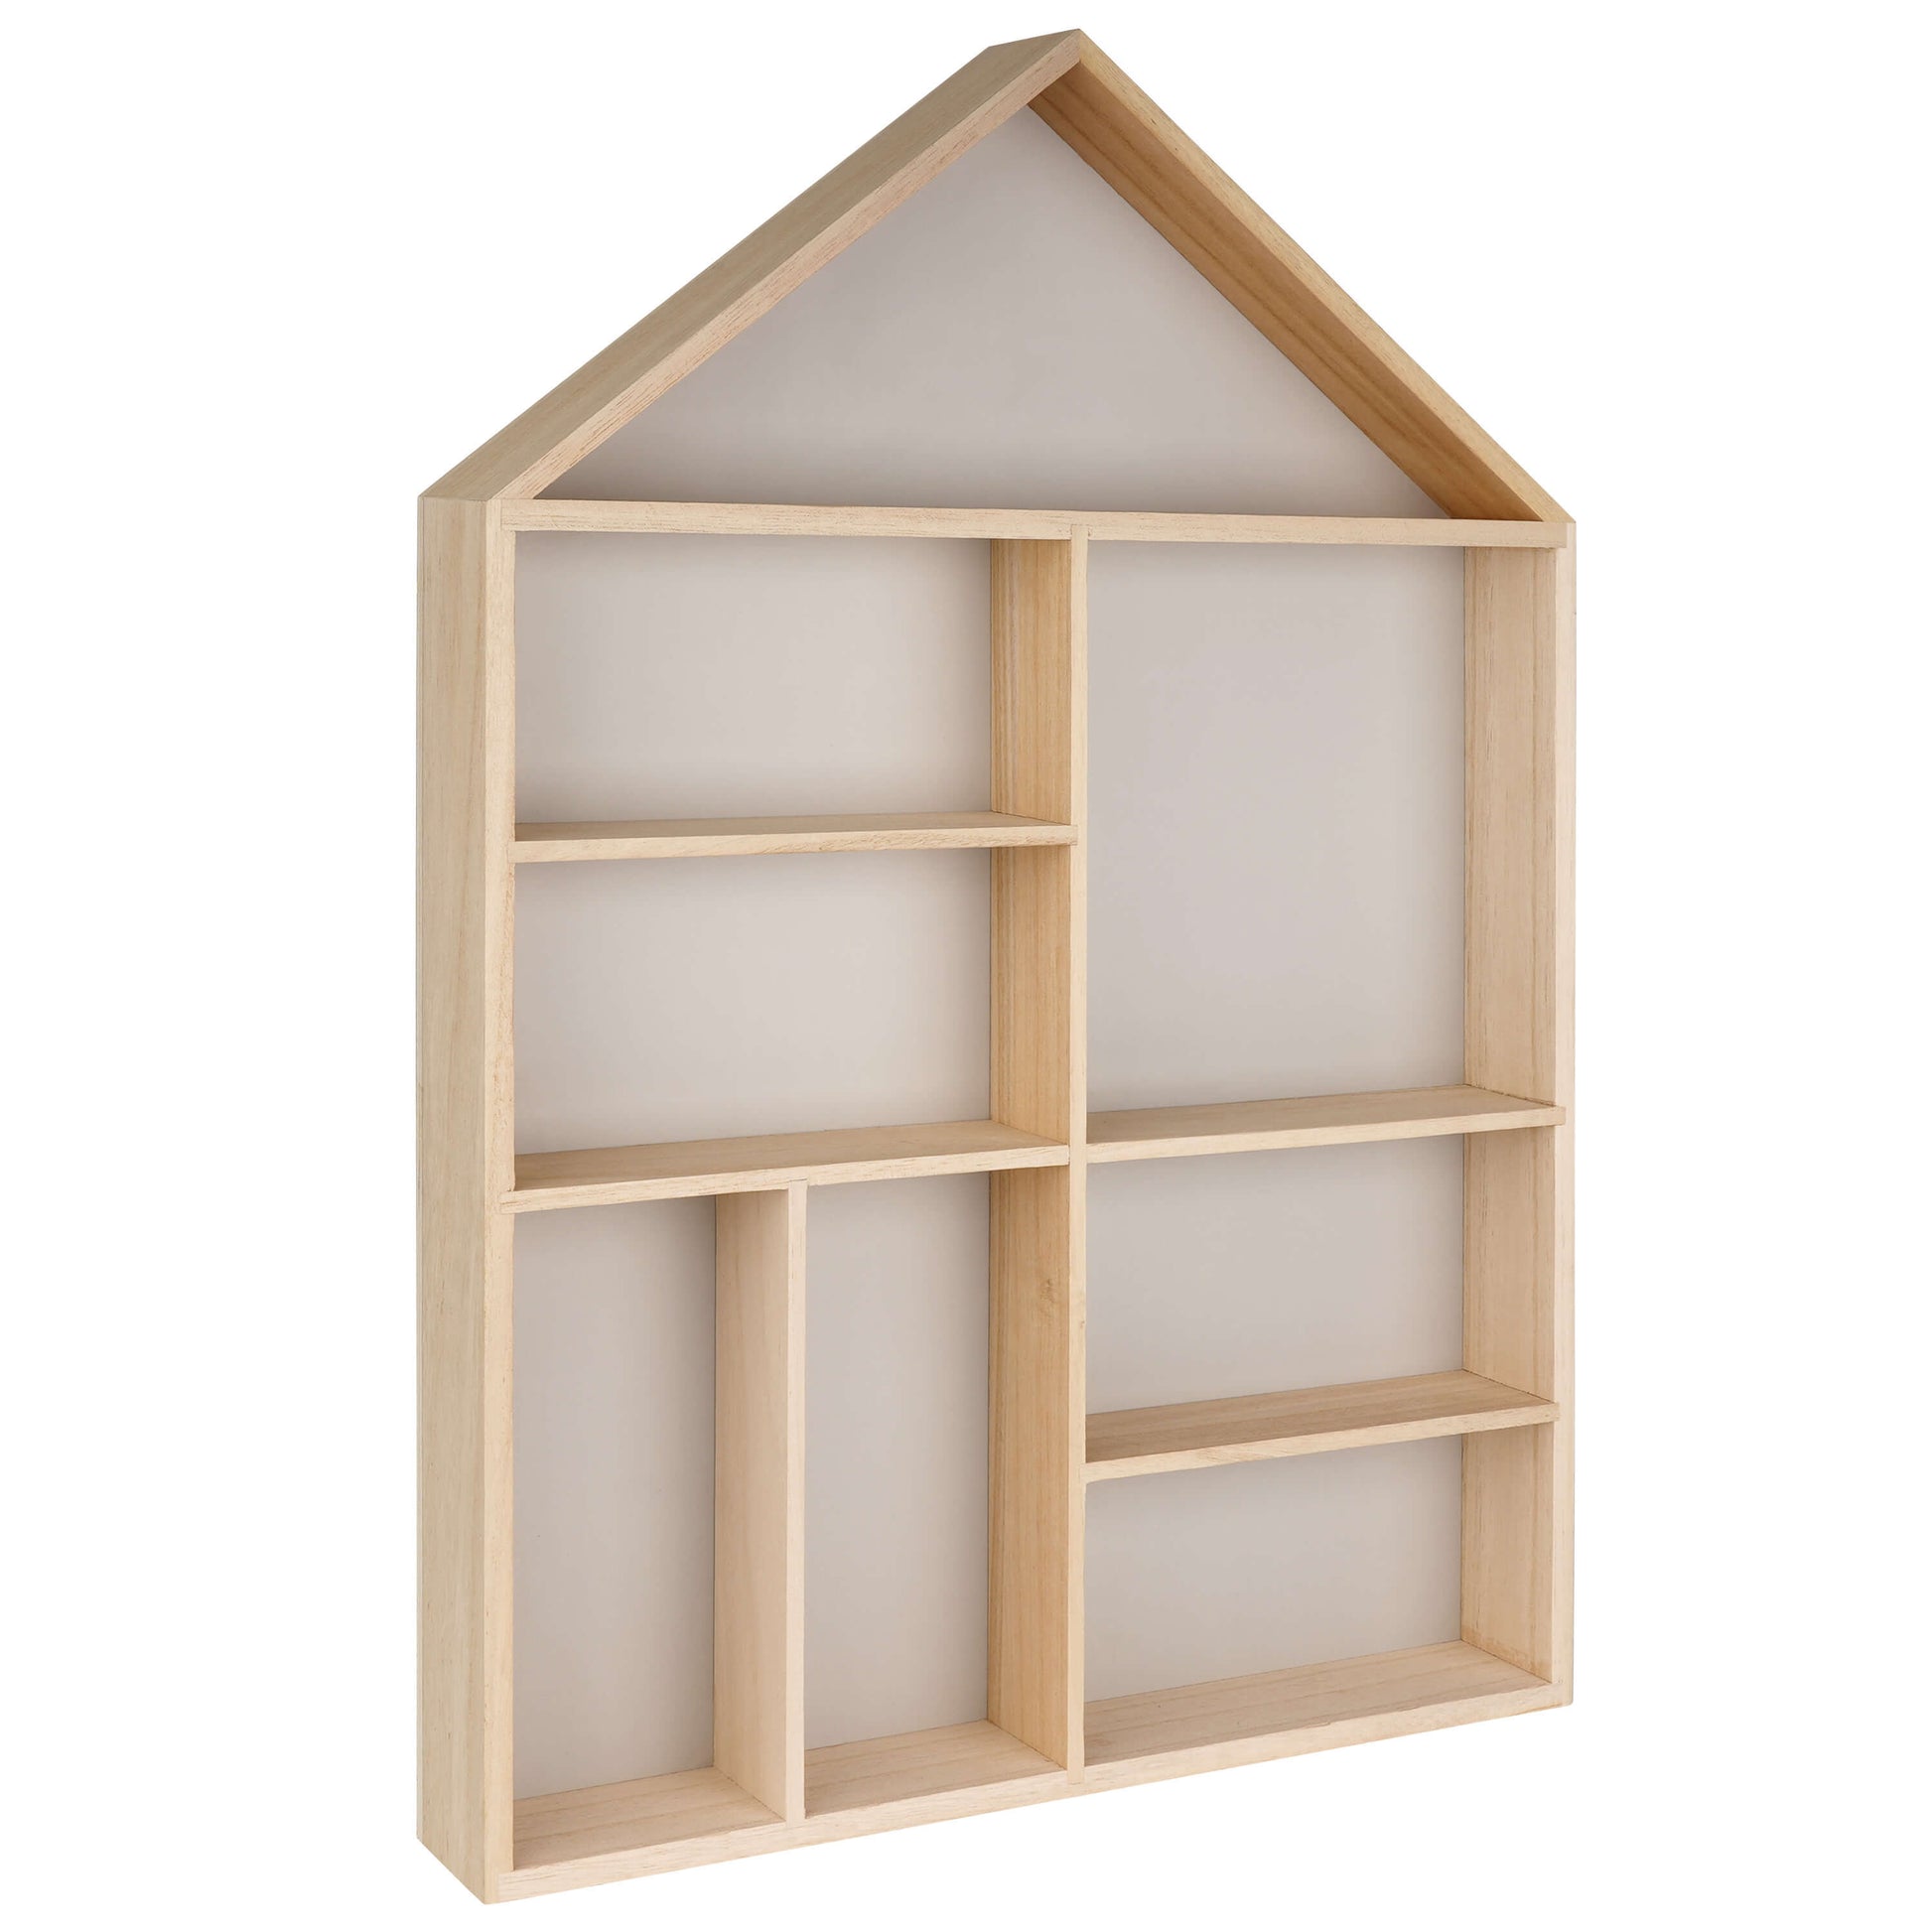 House shaped wooden toy display shelf with a gray-colored backboard ( Empty, side view)